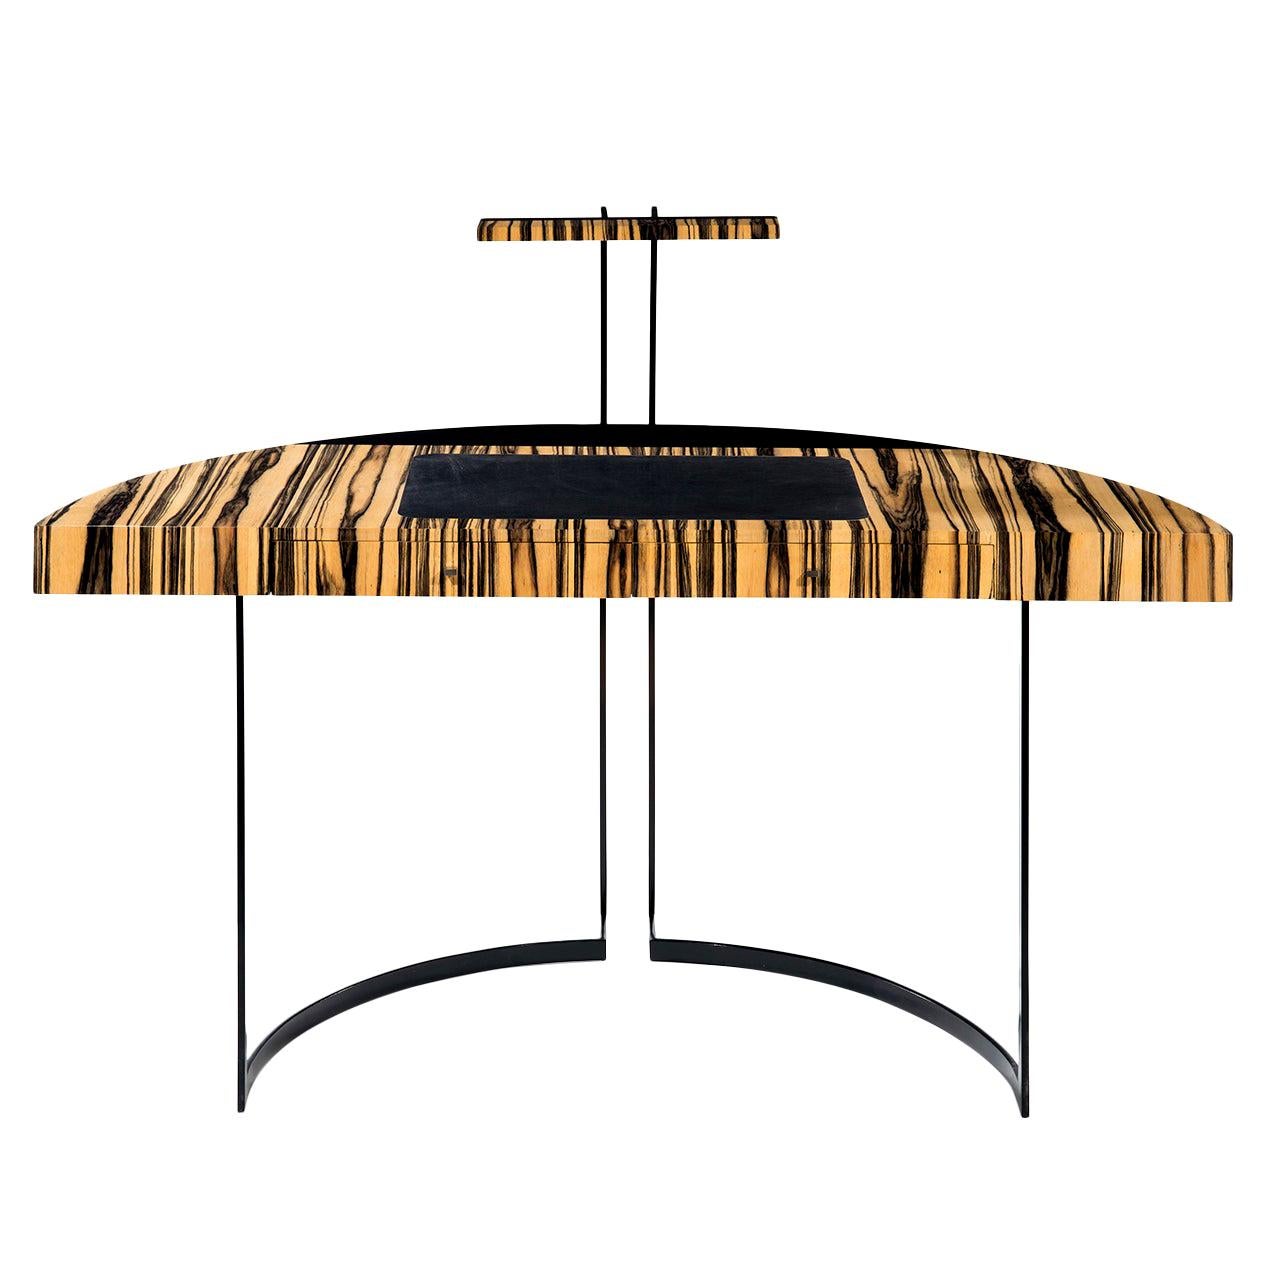 A semi-circular black lacquered metal legged desk with a white ebony veneer top and black leather desk blotter. The top of the back legs ends with a LED light.

Do not hesitate to ask for a shipping quote to get the best offer.


Aymeric Lefort